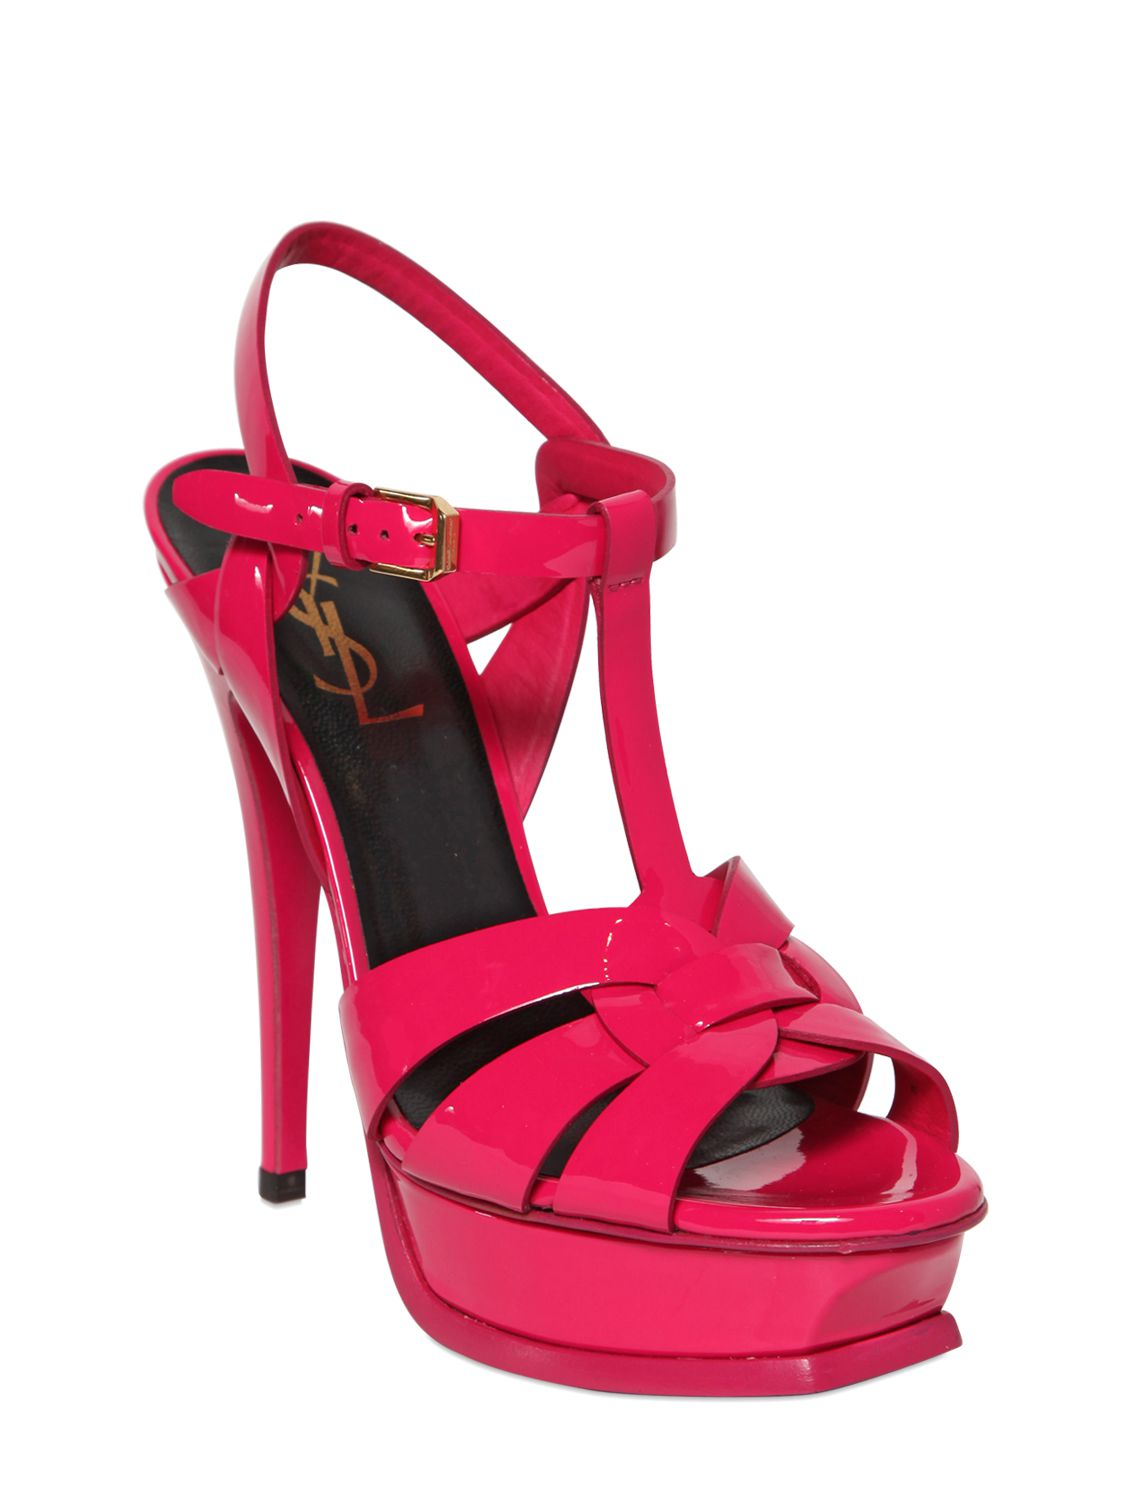 Saint Laurent 140Mm Tribute Patent Leather Sandals in Pink (FUCHSIA) | Lyst